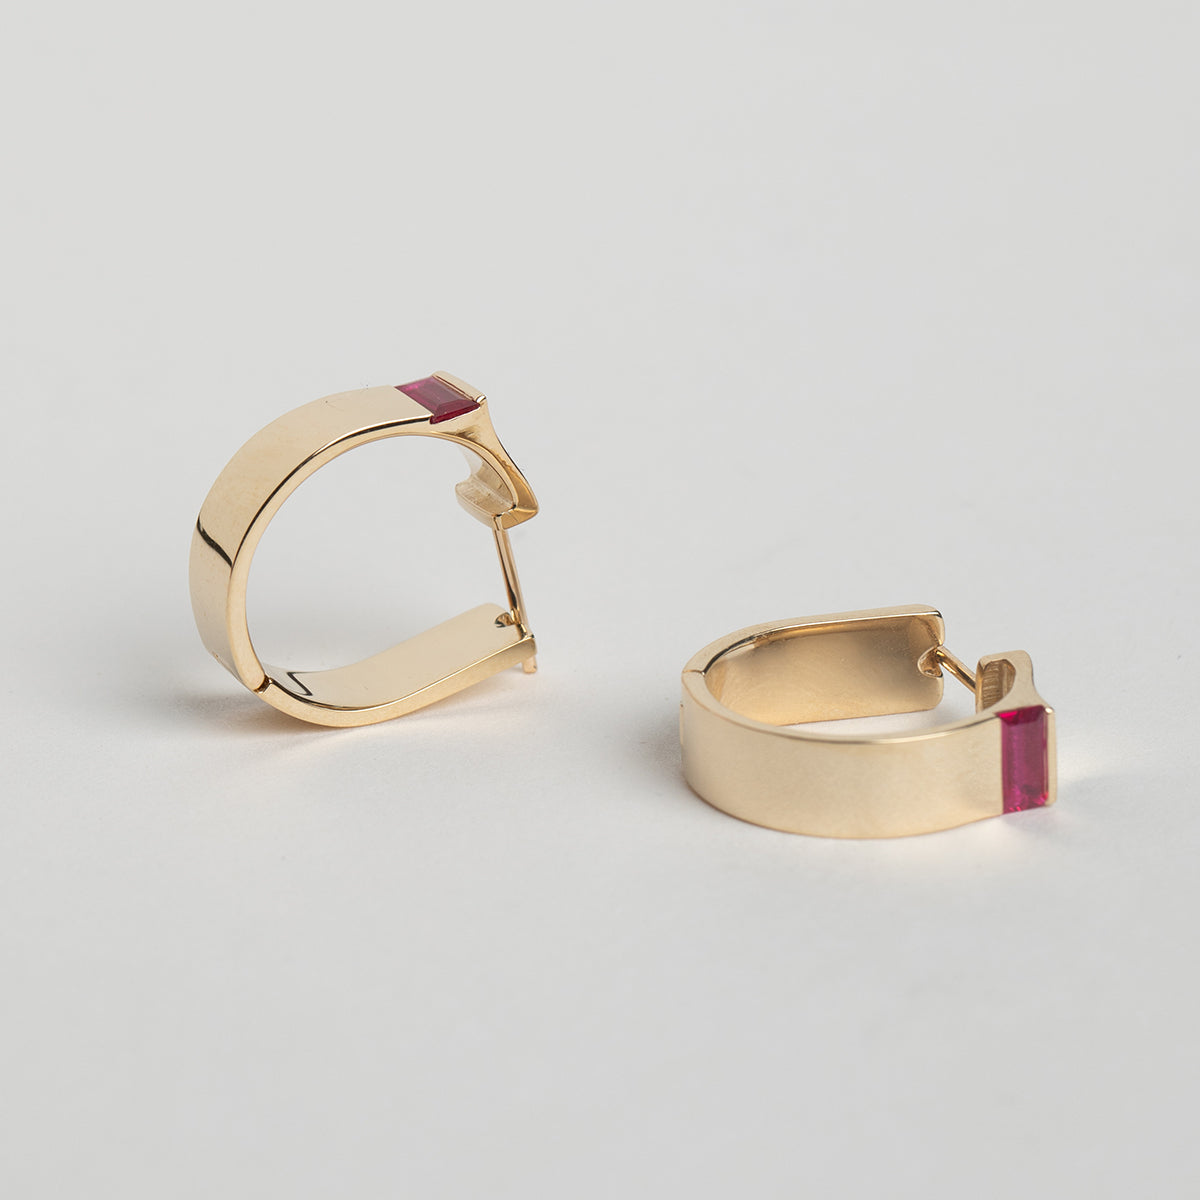 Minimalistic Braga Hoop Earrings 14k yellow gold  with precious ruby gemstones by SHW Fine Jewelry Made in New York City Sustainably